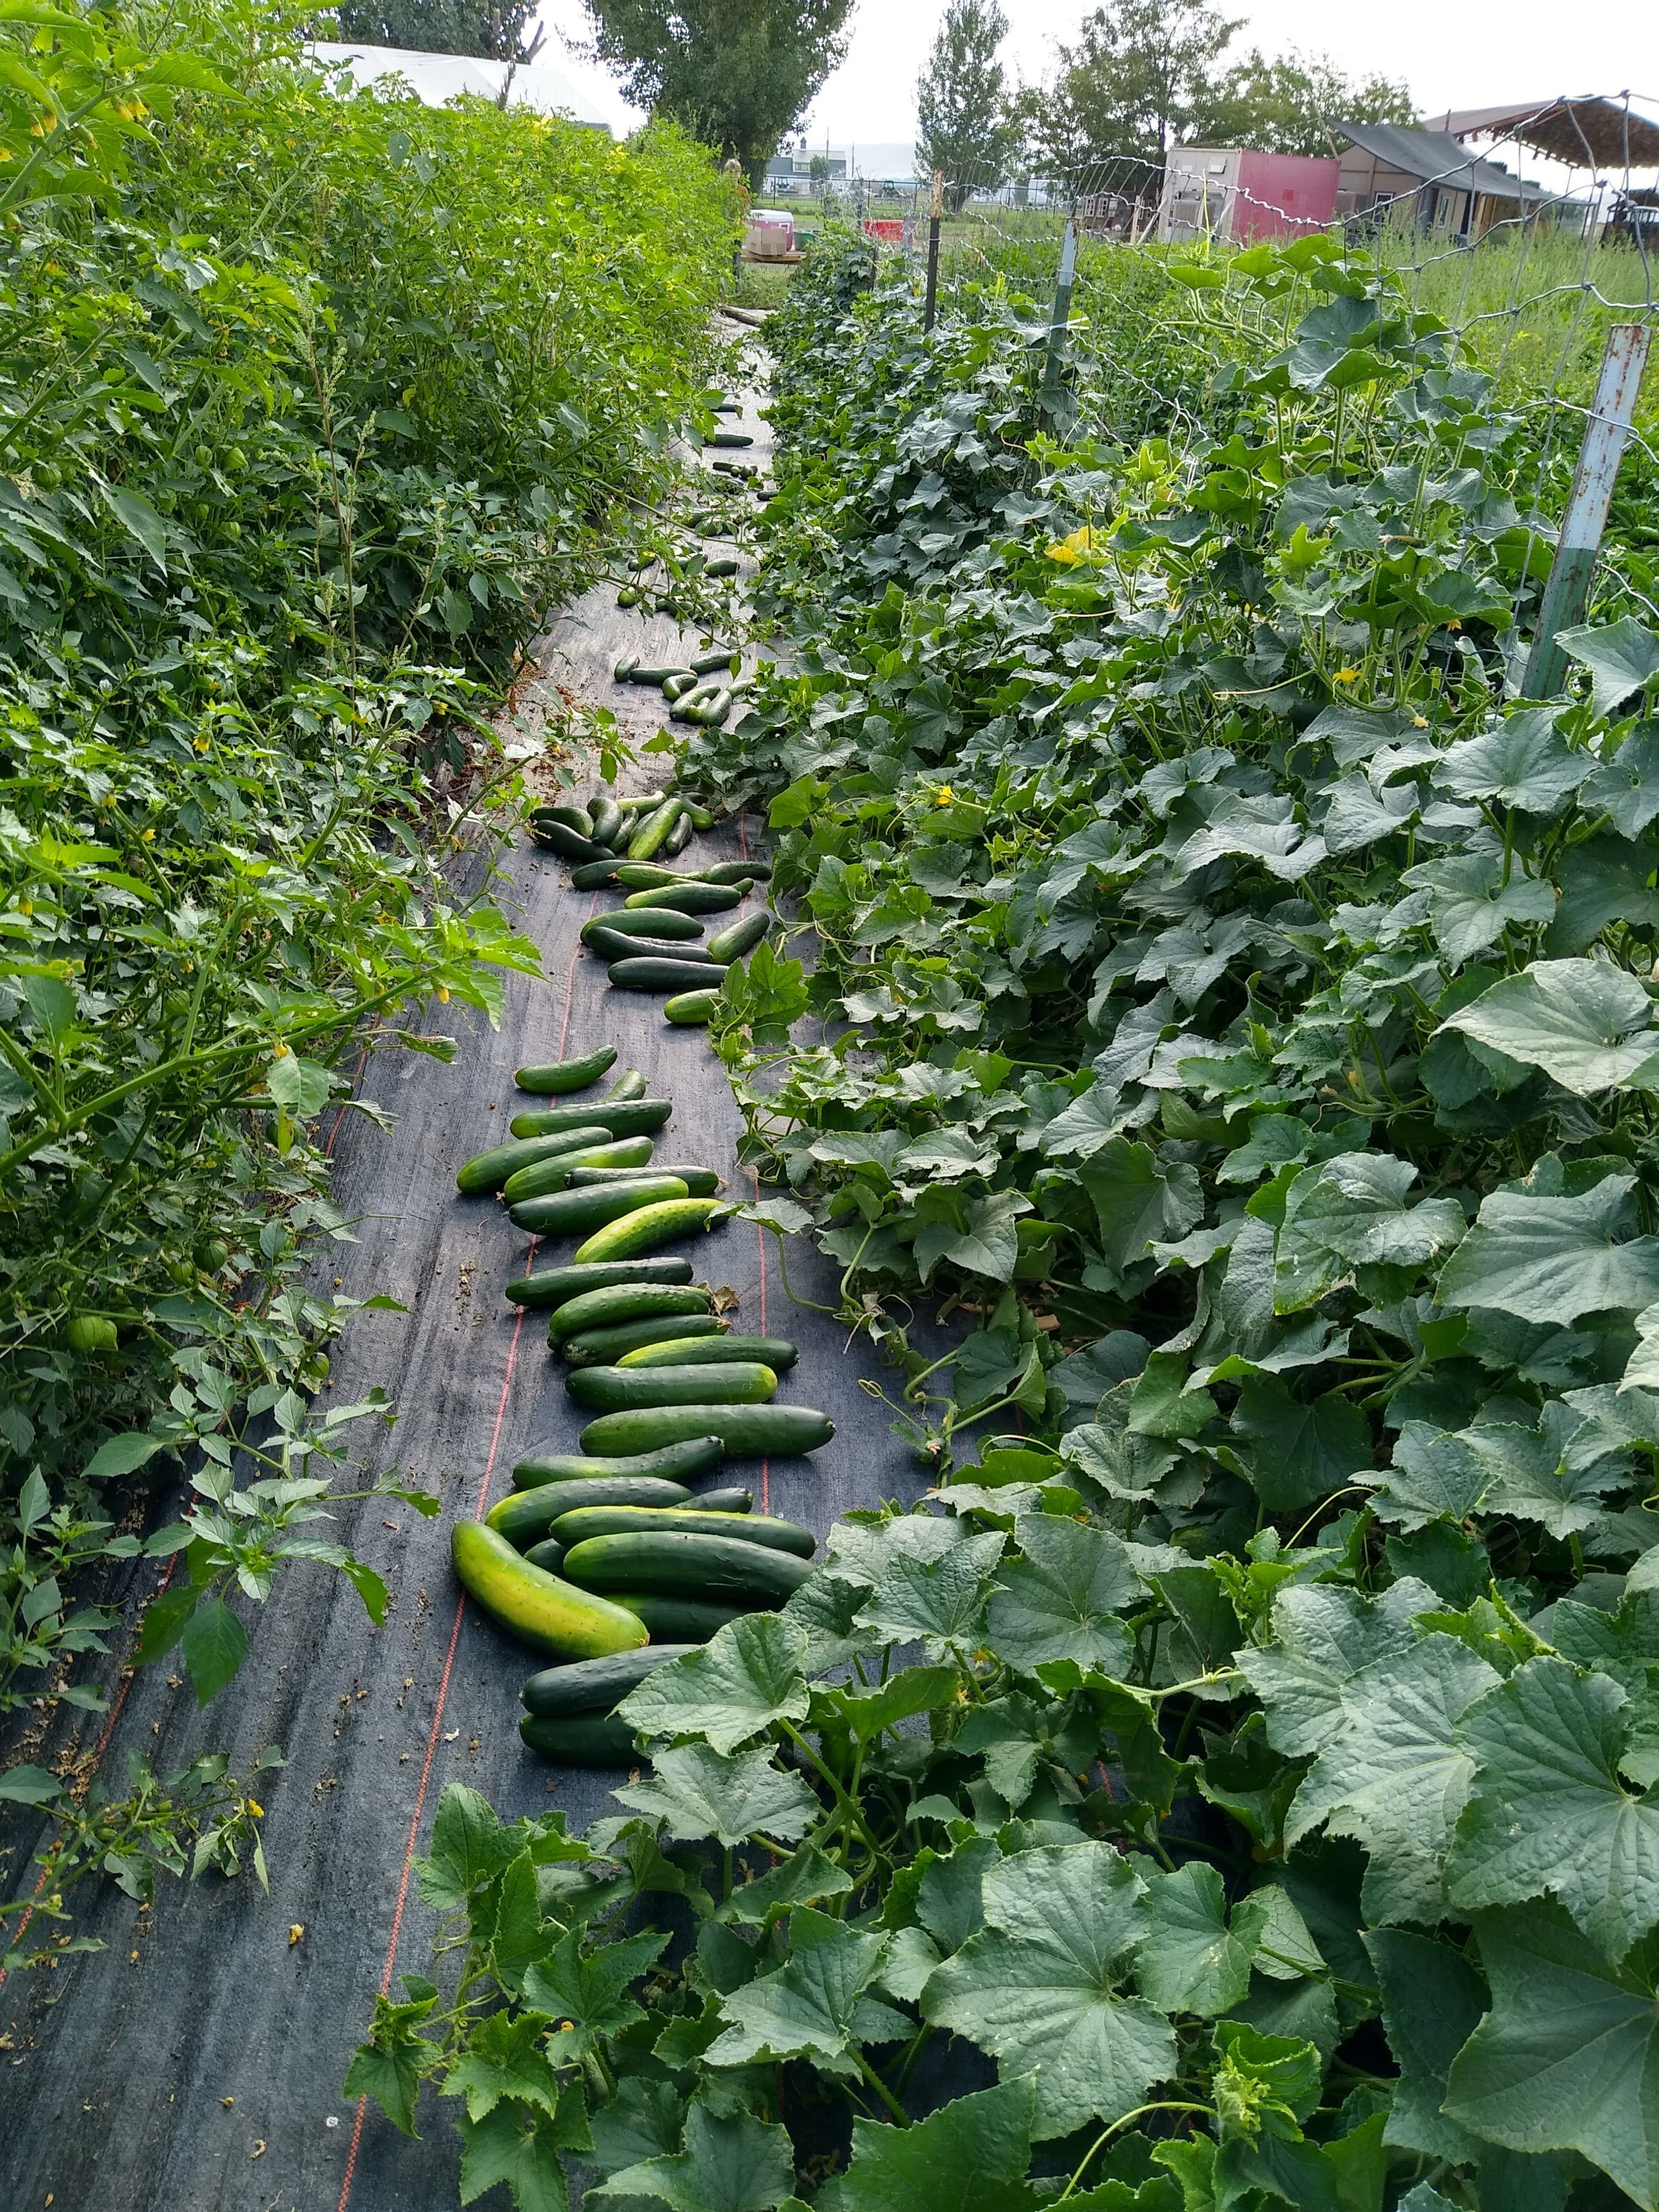 Summer Week #12 - The year of the cucumber!